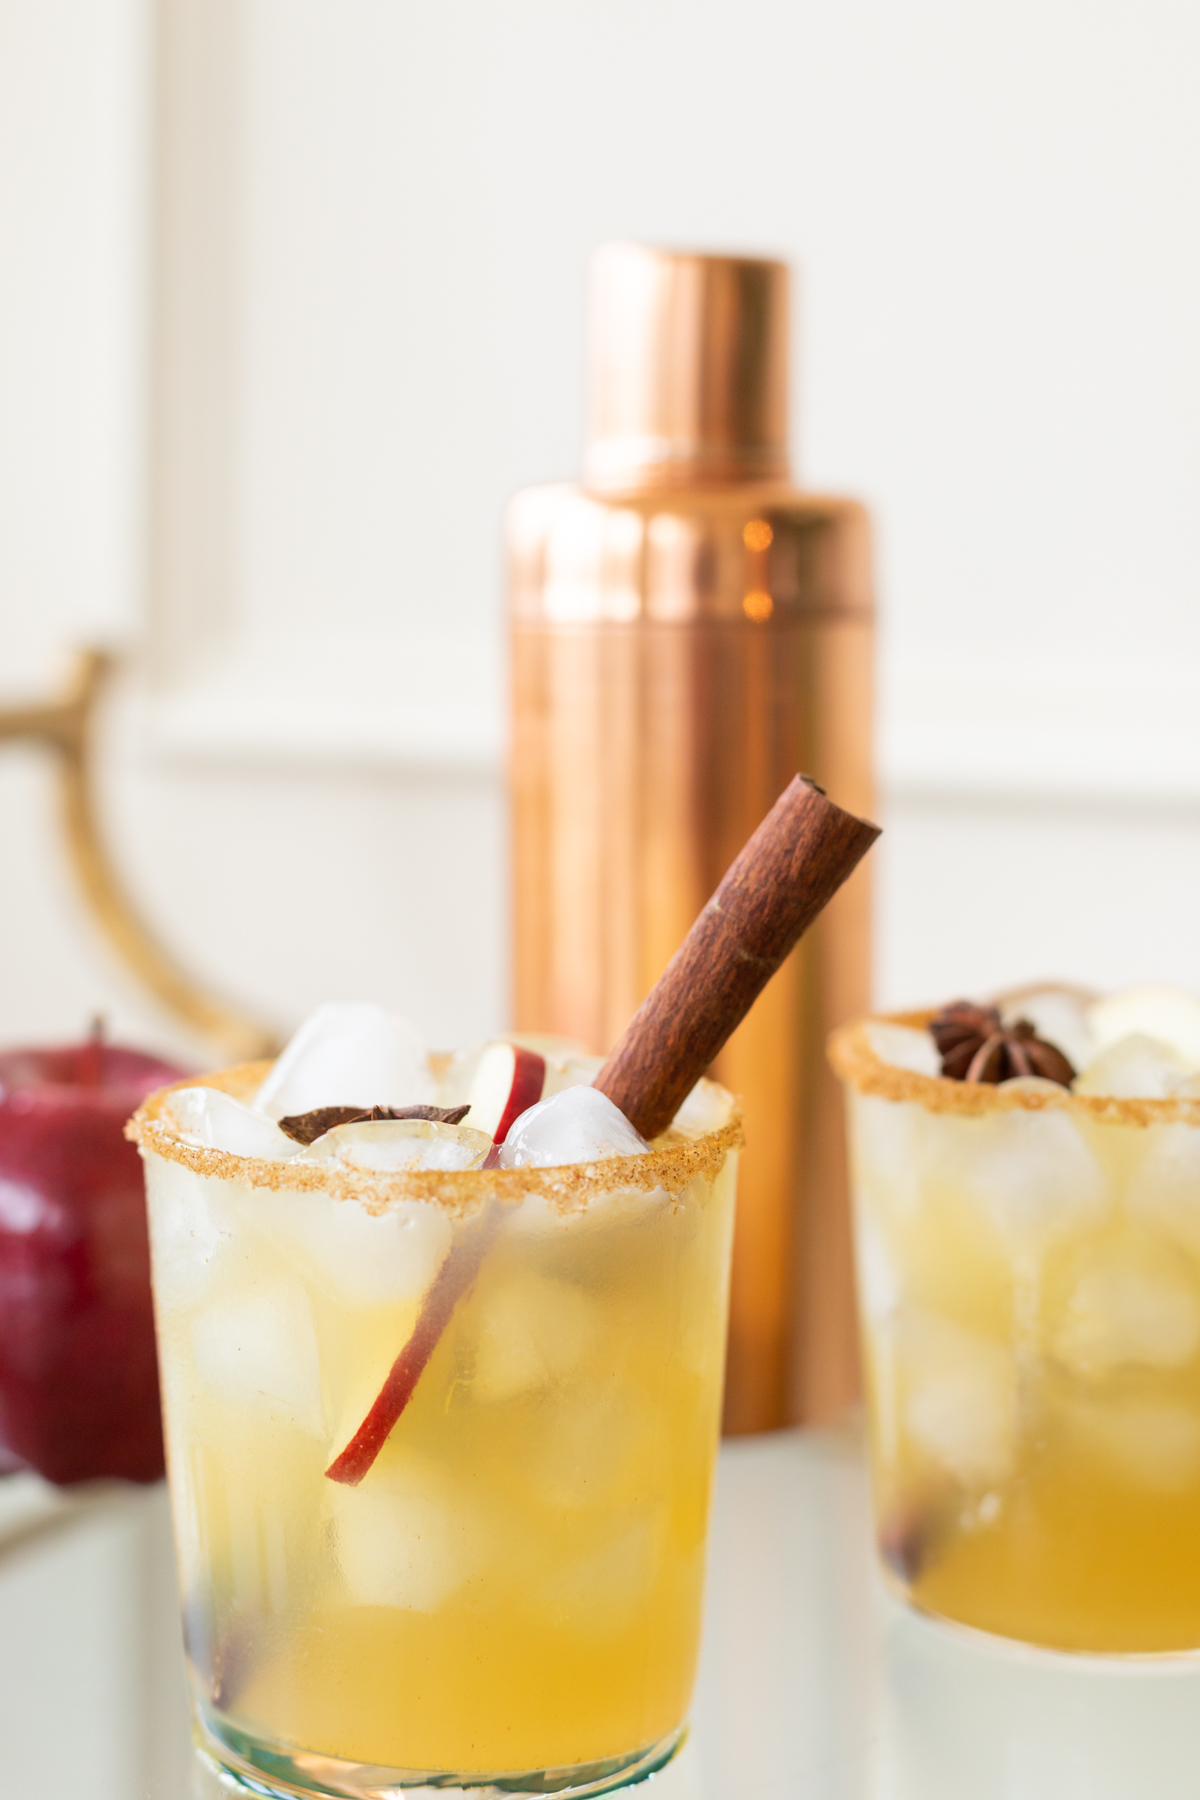 Clear glasses with apple cider margaritas, rimmed in sugar and garnished with a cinnamon stick with a copper shaker in the background.